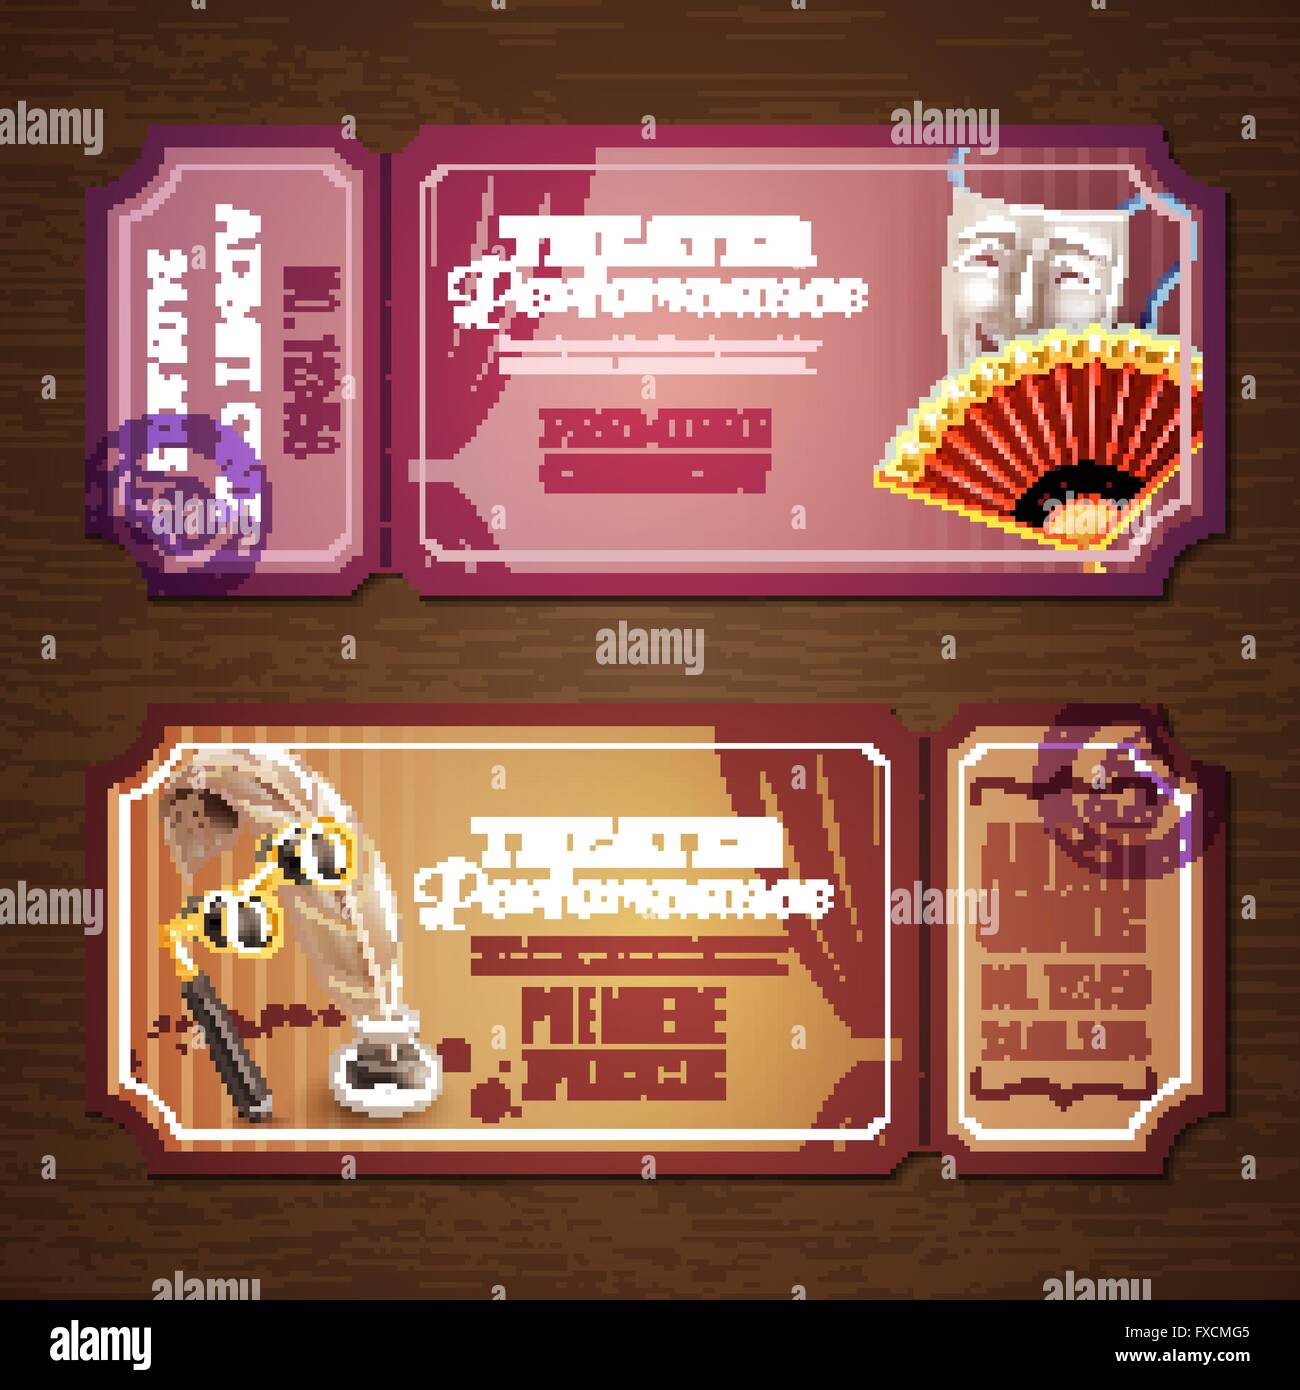 Theatre Tickets Banners Set Stock Vector